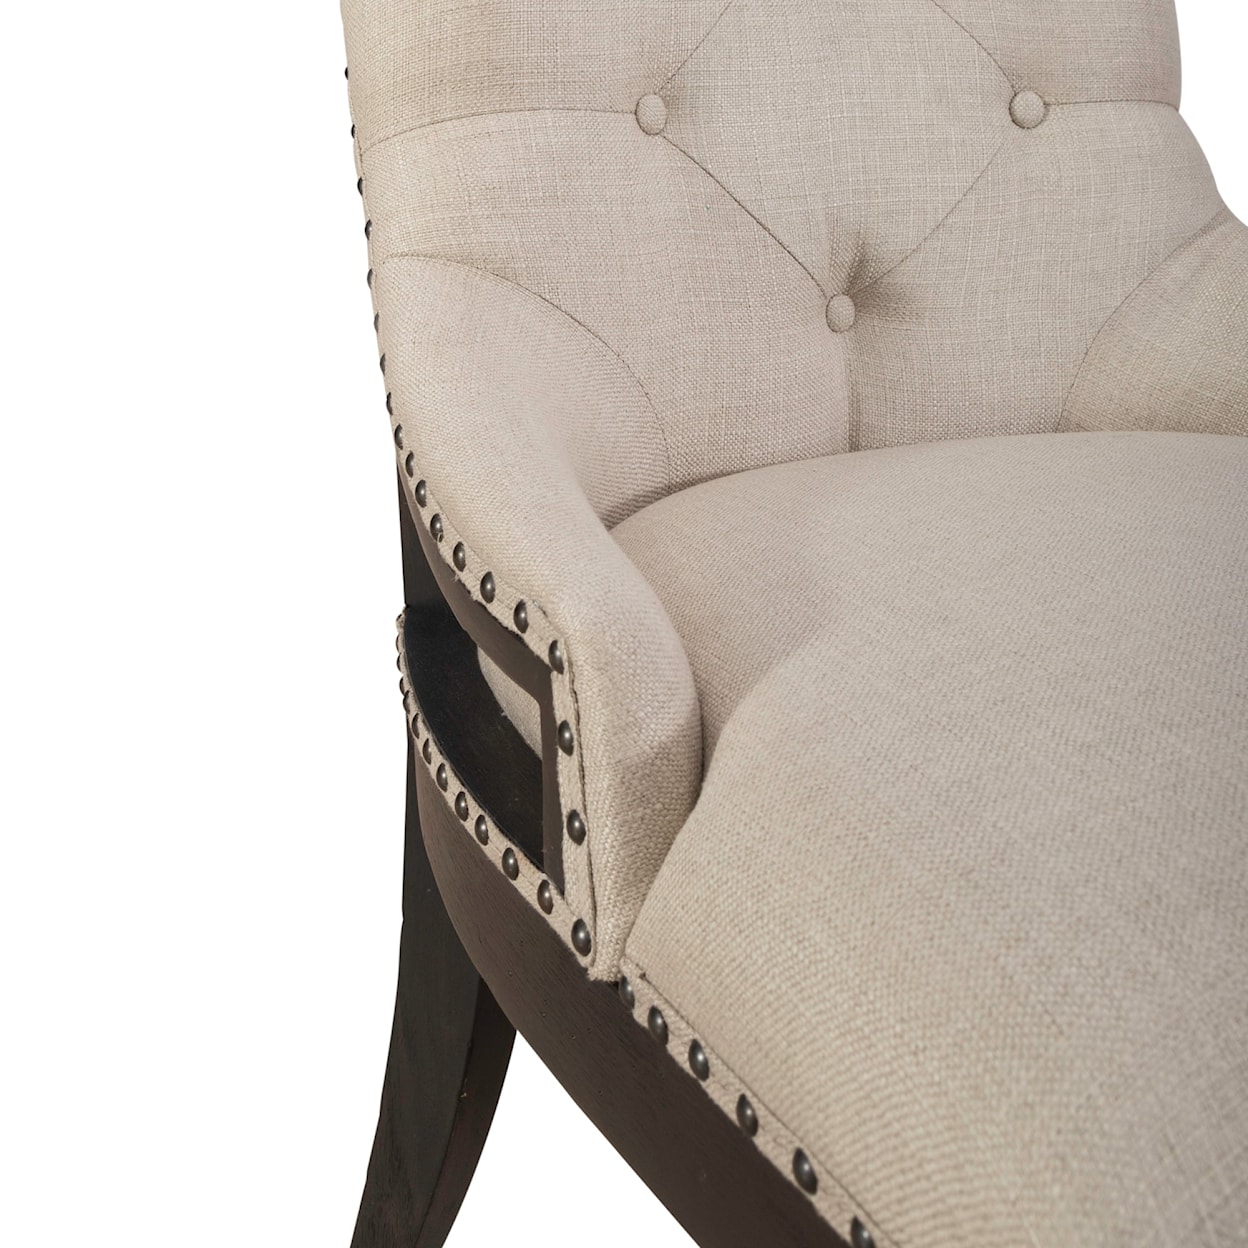 Liberty Furniture Americana Farmhouse Upholstered Sheltered Side Chair